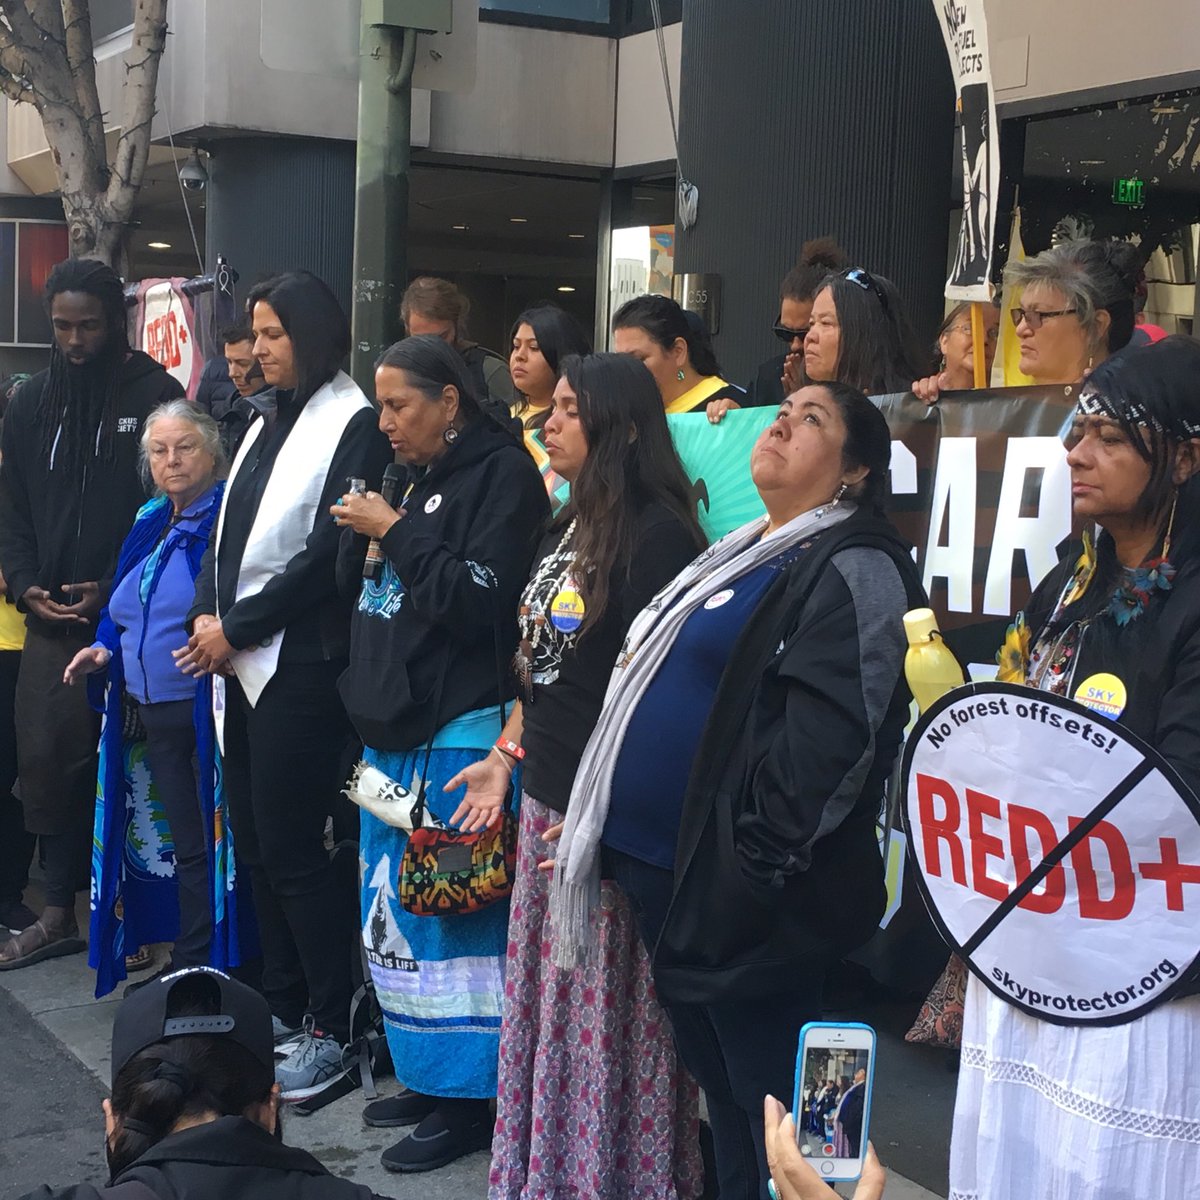 #IndigenousWomenRise at the forefront of the #RiseAgainstClimateCapitalism action. #NoCO2lonialism #Sol2Sol